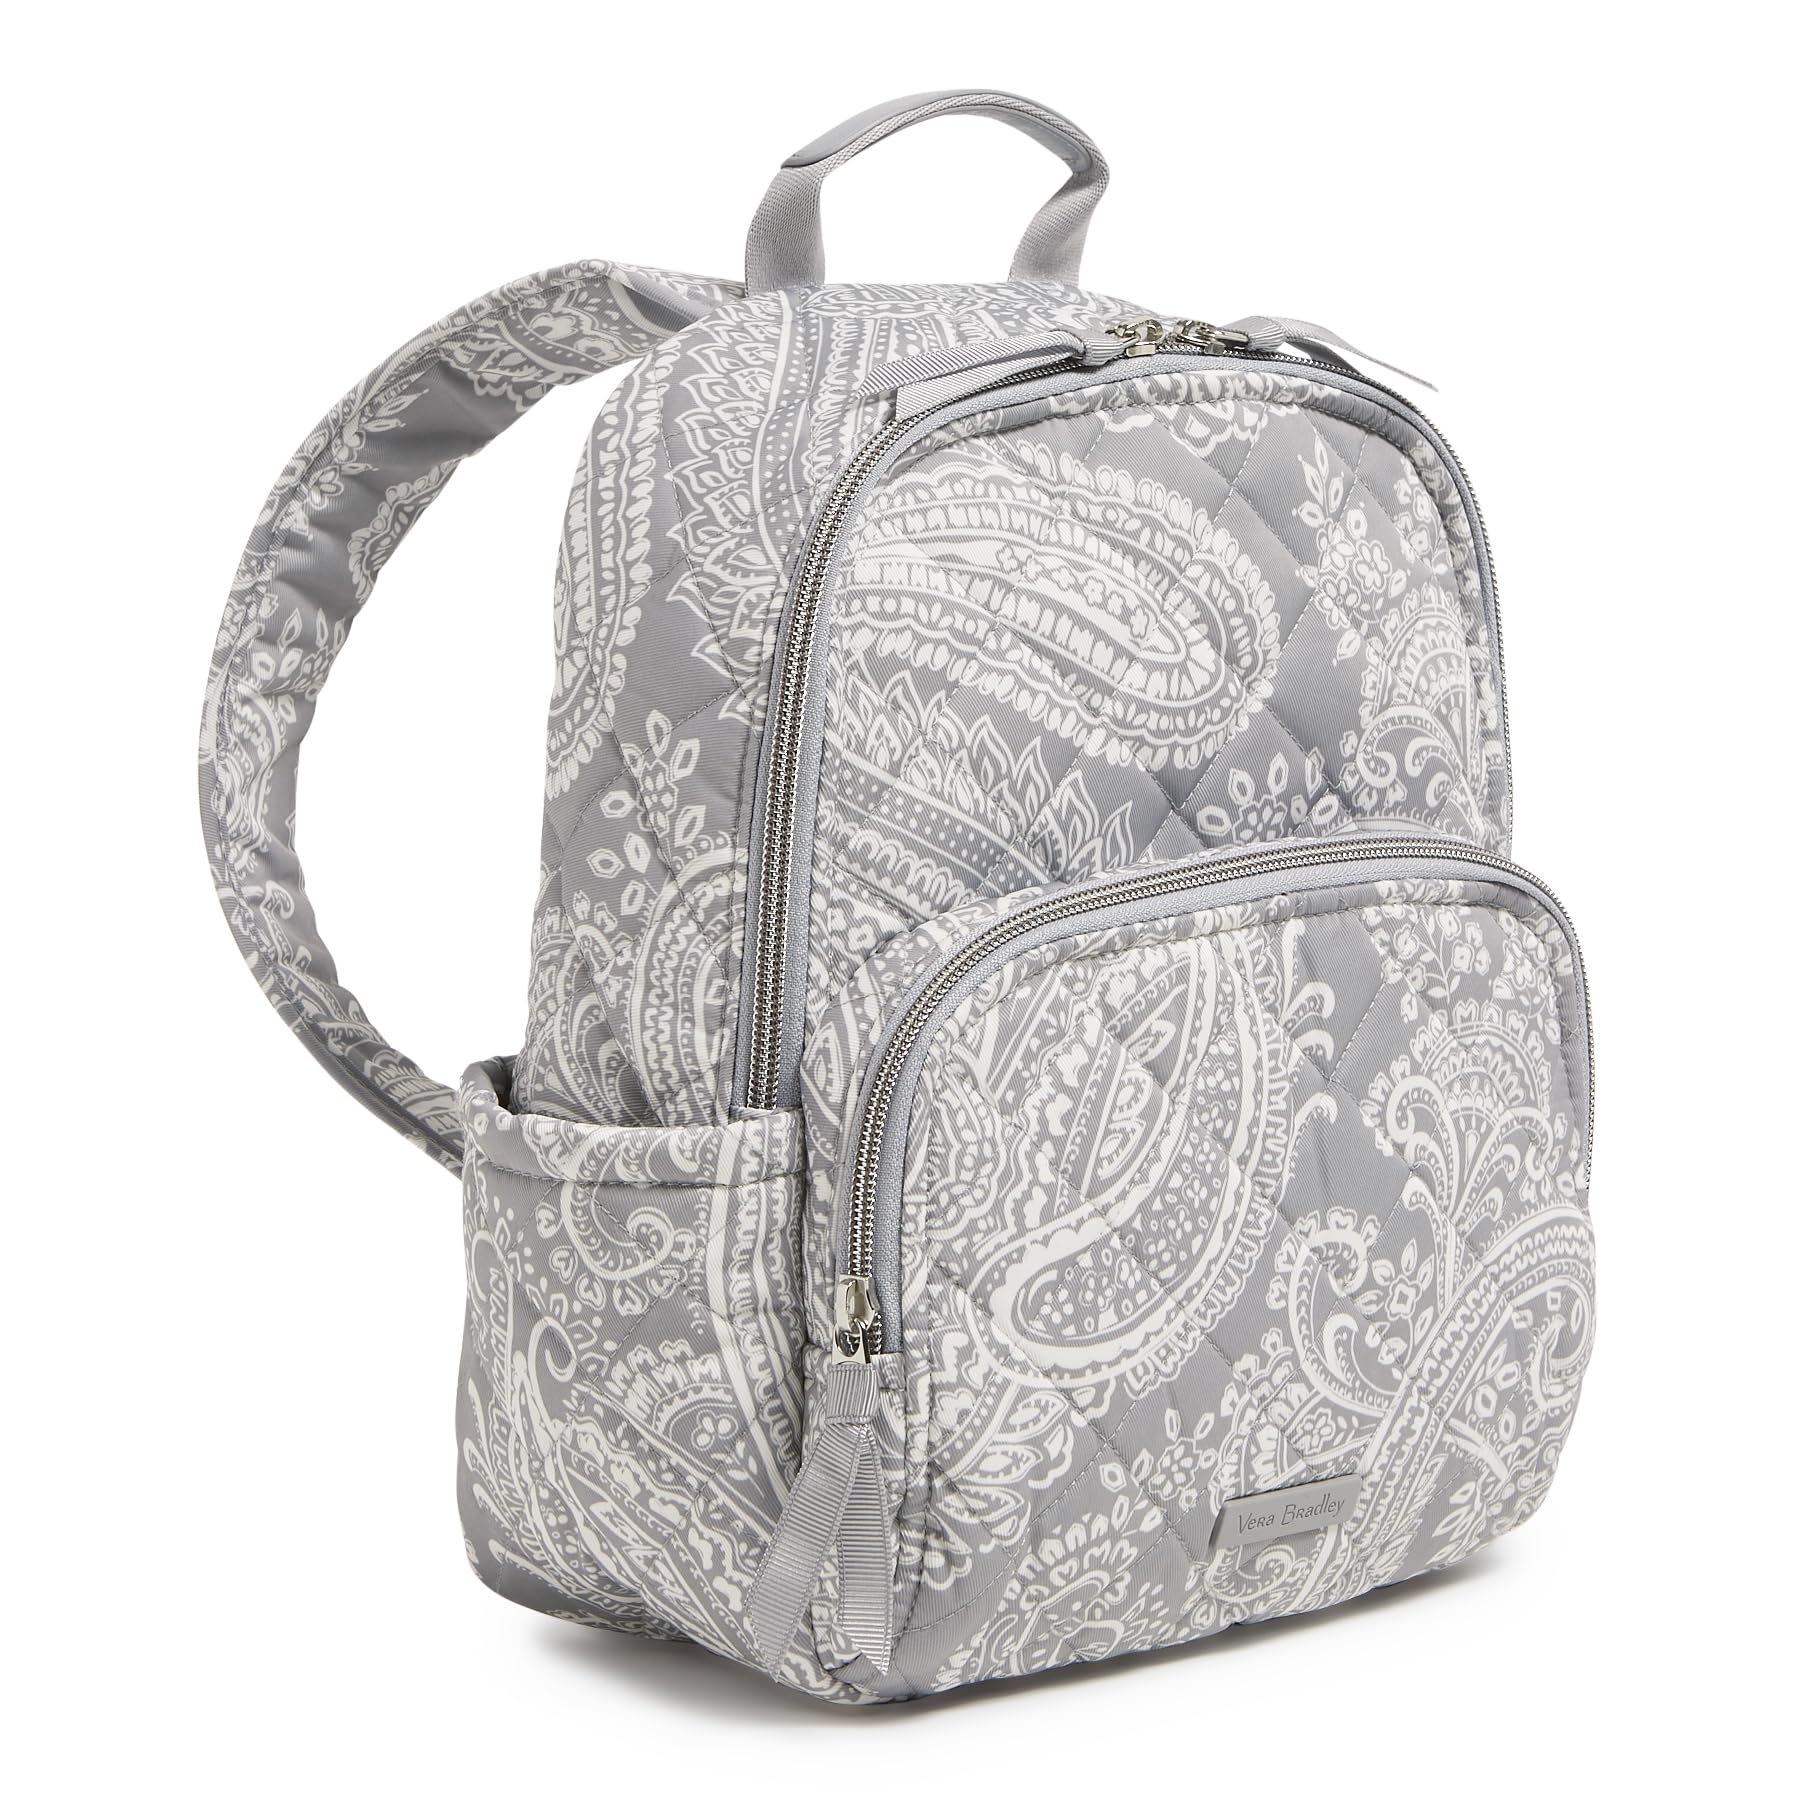 Vera Bradley Women's, Performance Twill Small Backpack, Cloud Gray Paisley, One Size